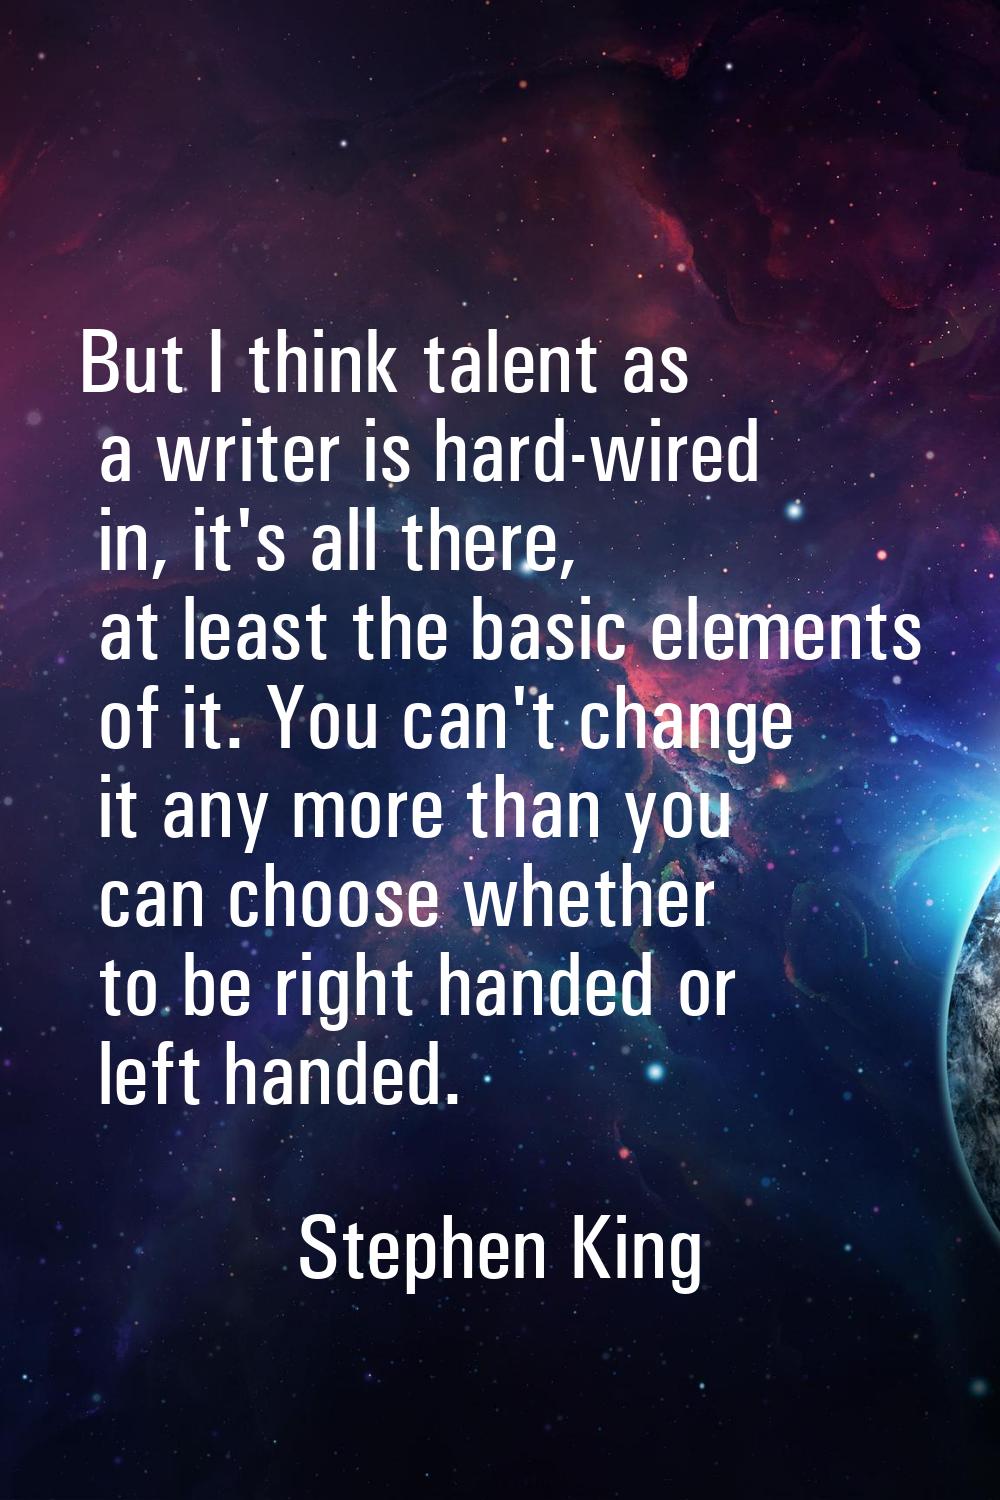 But I think talent as a writer is hard-wired in, it's all there, at least the basic elements of it.